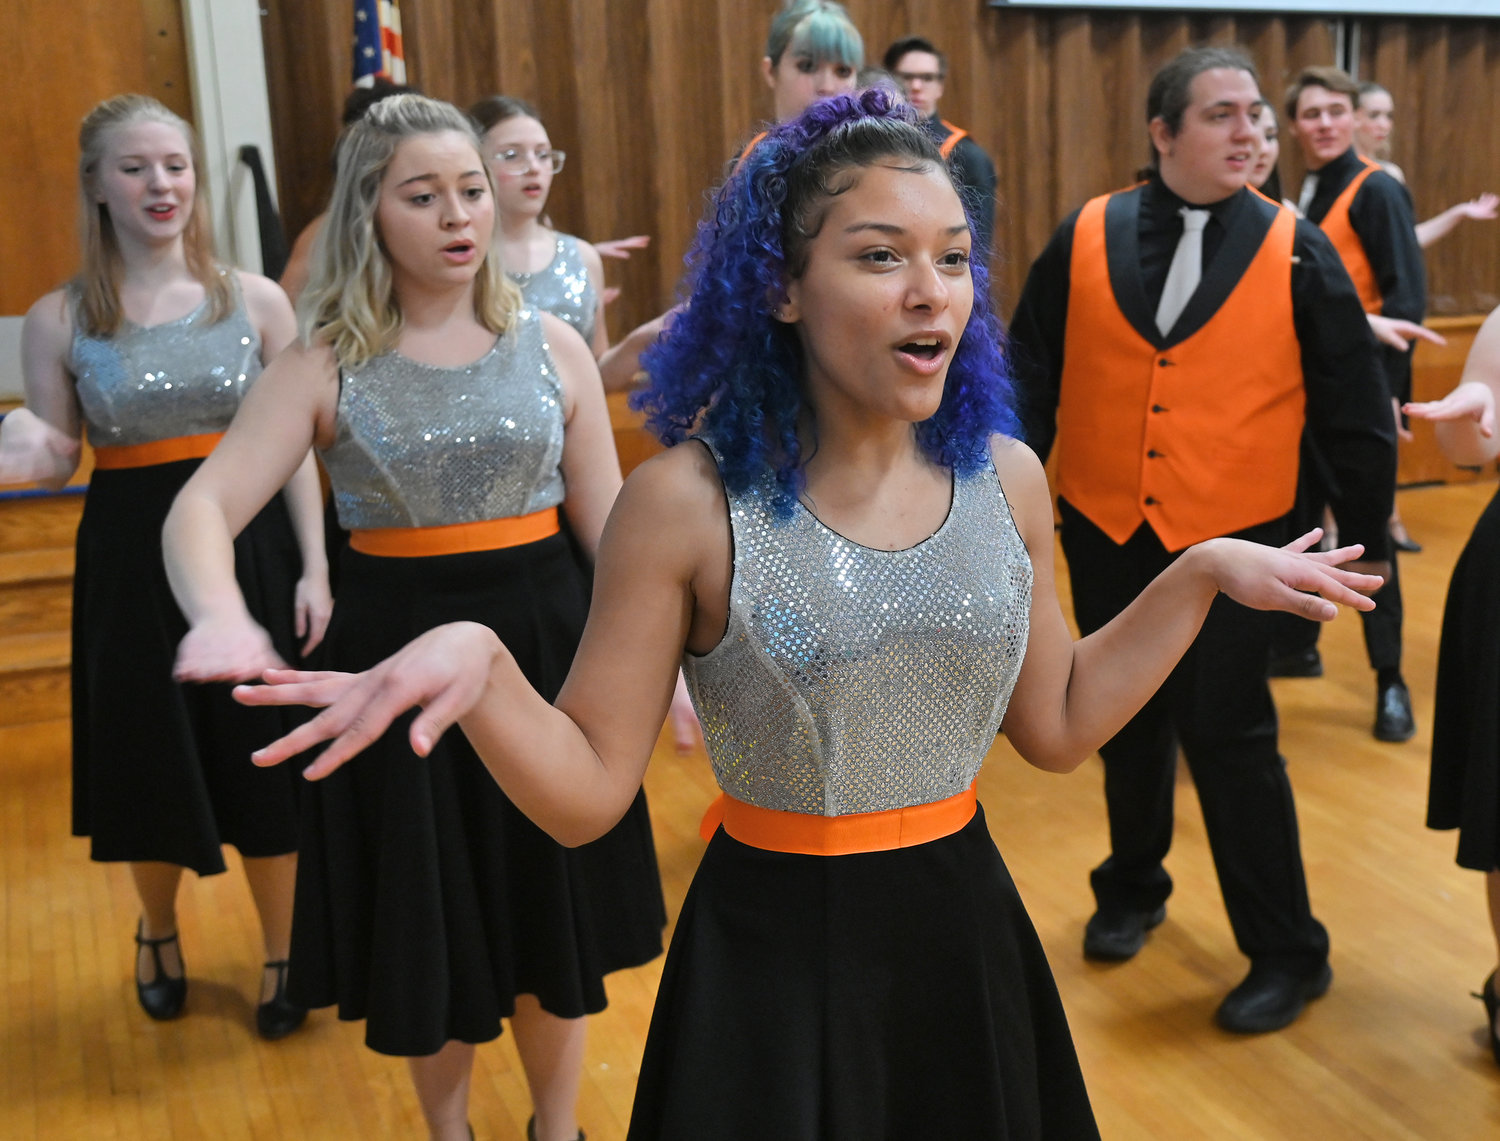 Rome Free Academy Rhapsody Show Choir member Alana DeJosie sings and dances during the  Friday, Jan. 13 performance at Clough School in Rome.